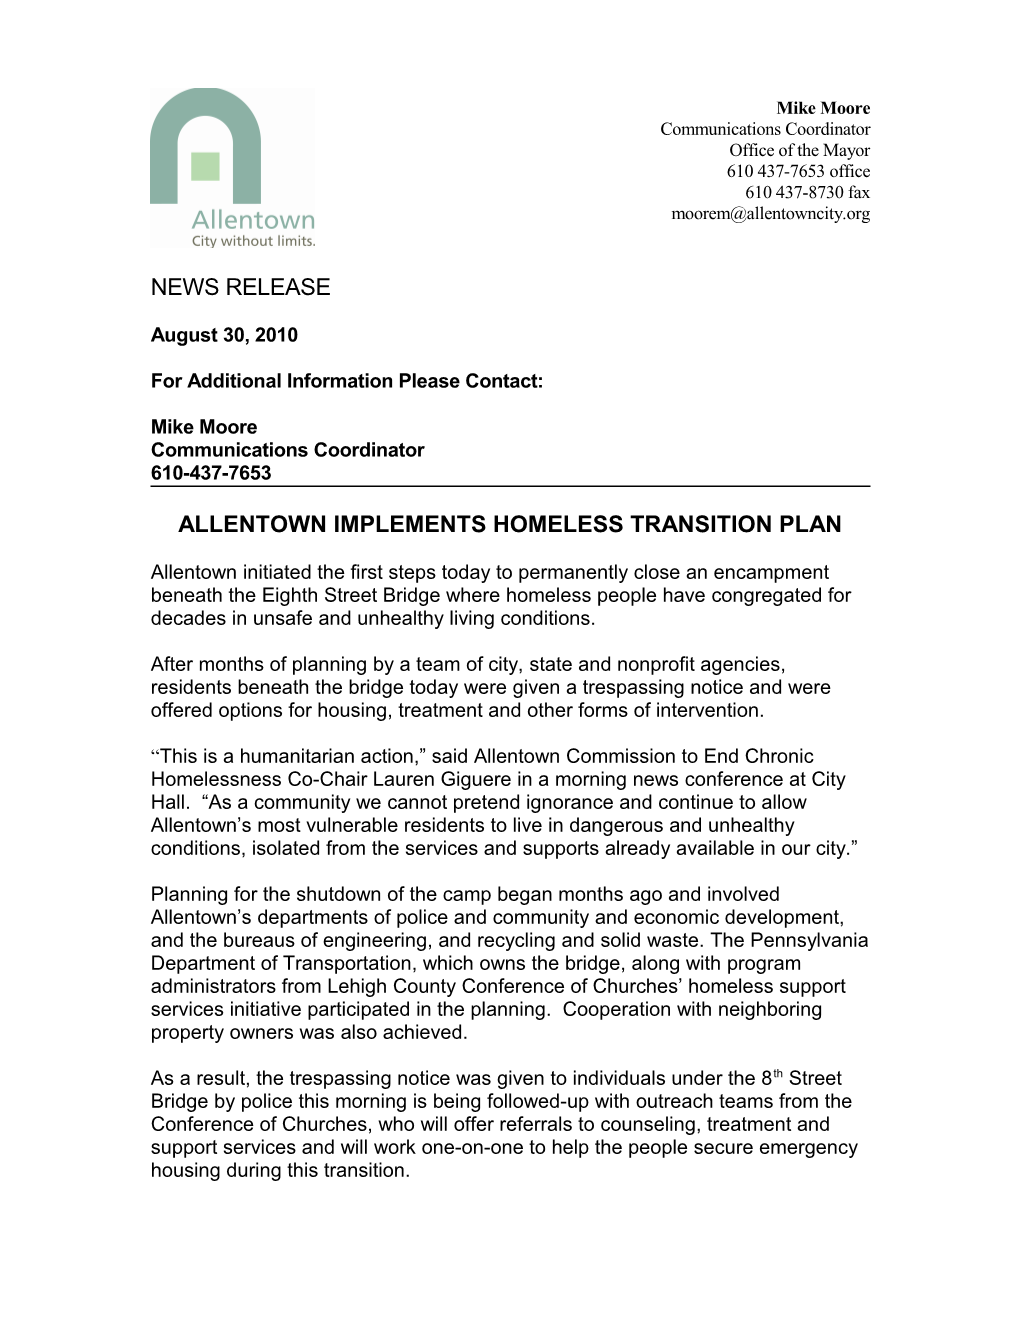 Allentown Implements Homeless Transition Plan